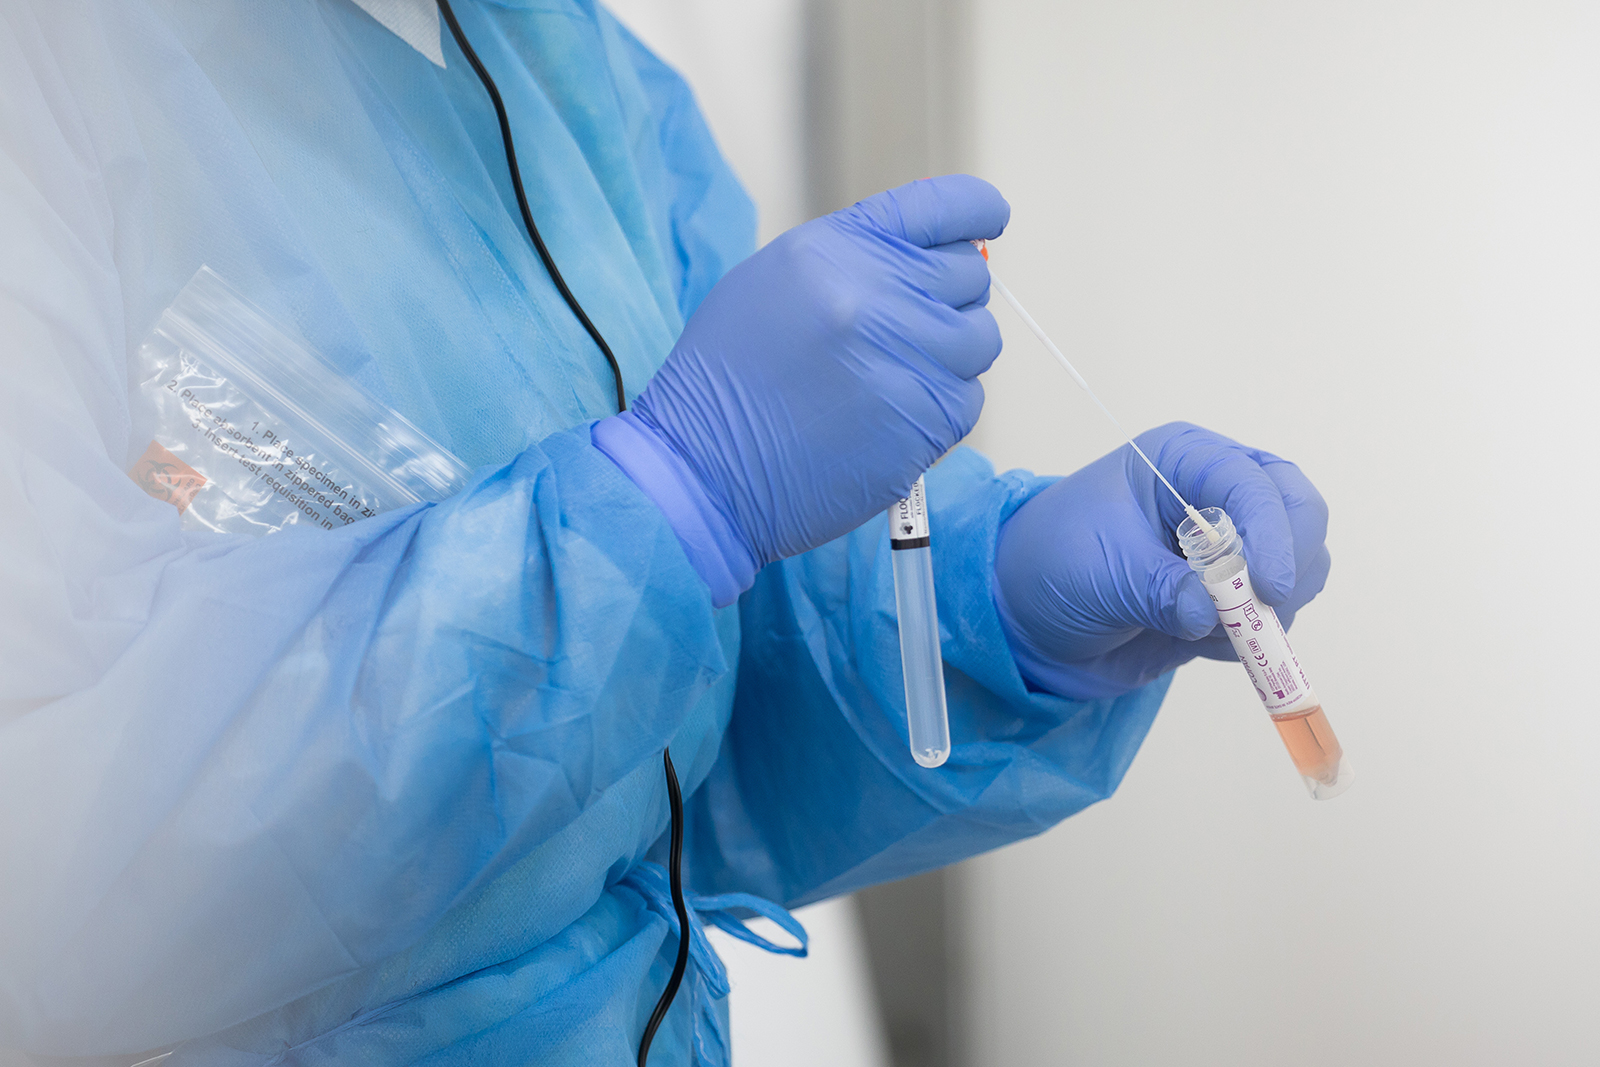 A One Medical Group Inc. nurse practitioner places a swab inside a test tube after swabbing a patient at a Covid-19 testing center in Brooklyn, New York on April 20. Michael Nagle/Bloomberg/Getty Images